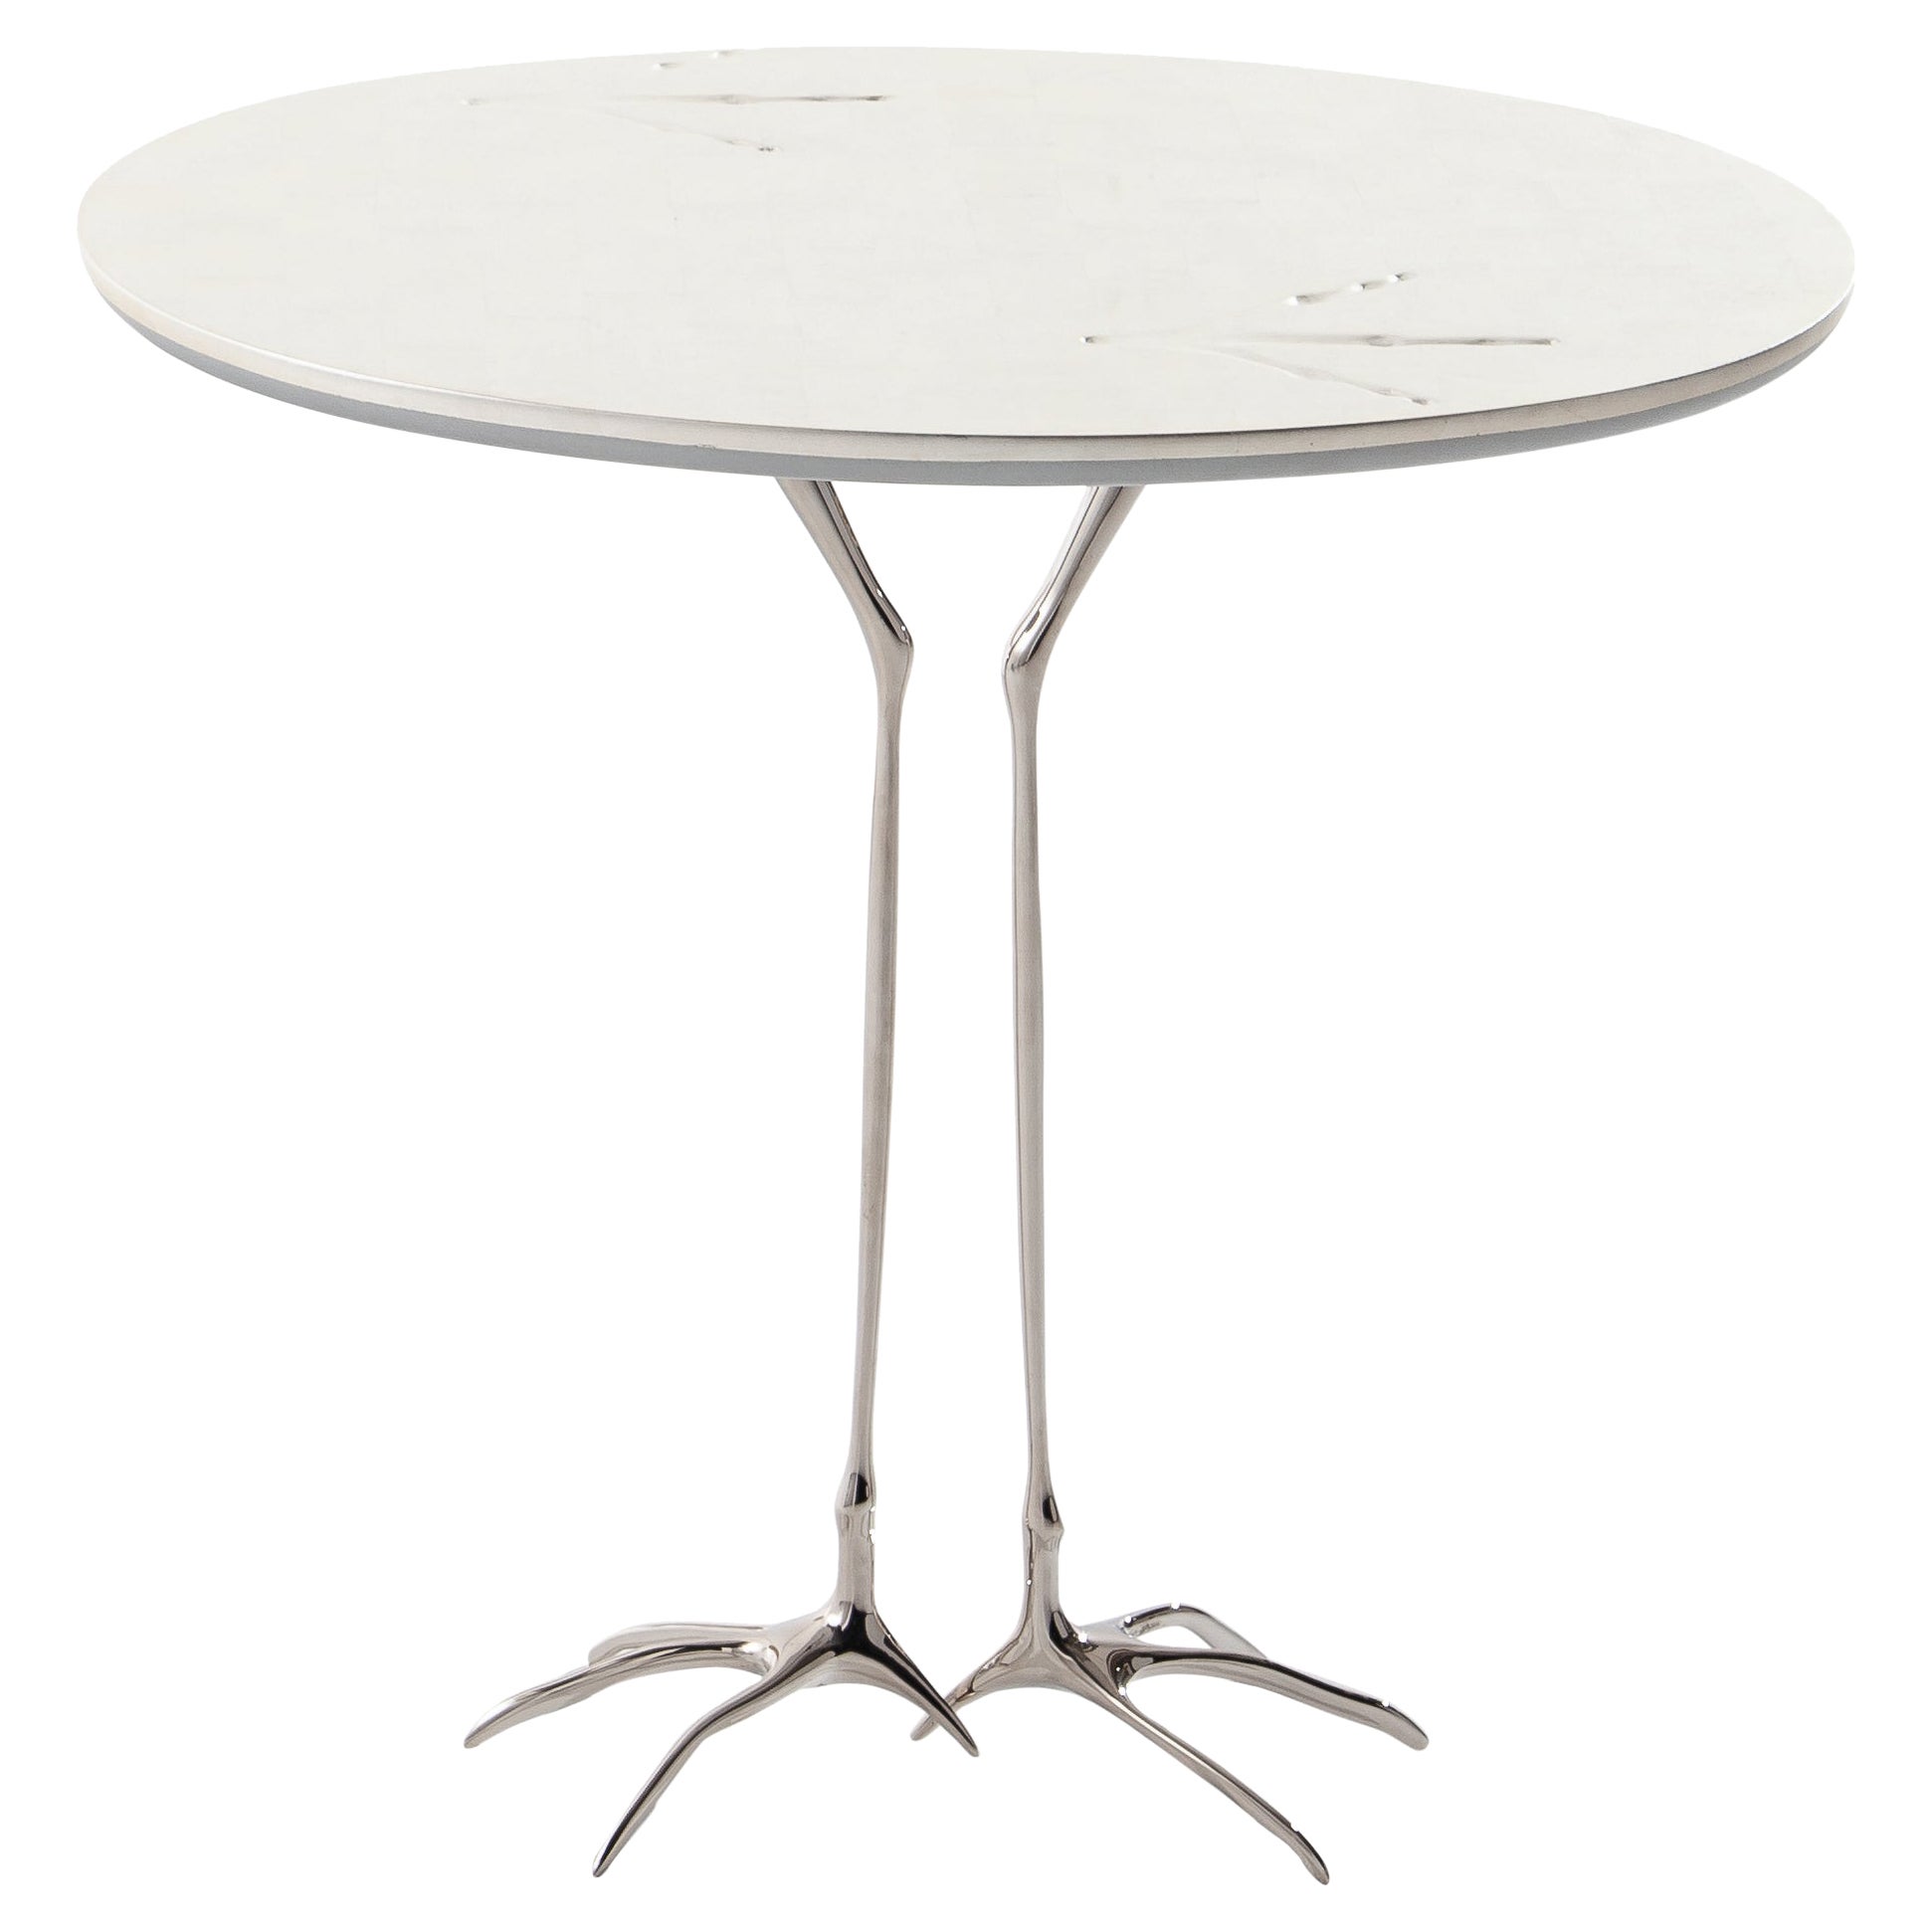 Meret Oppenheim Traccia Sculptural Table For Sale